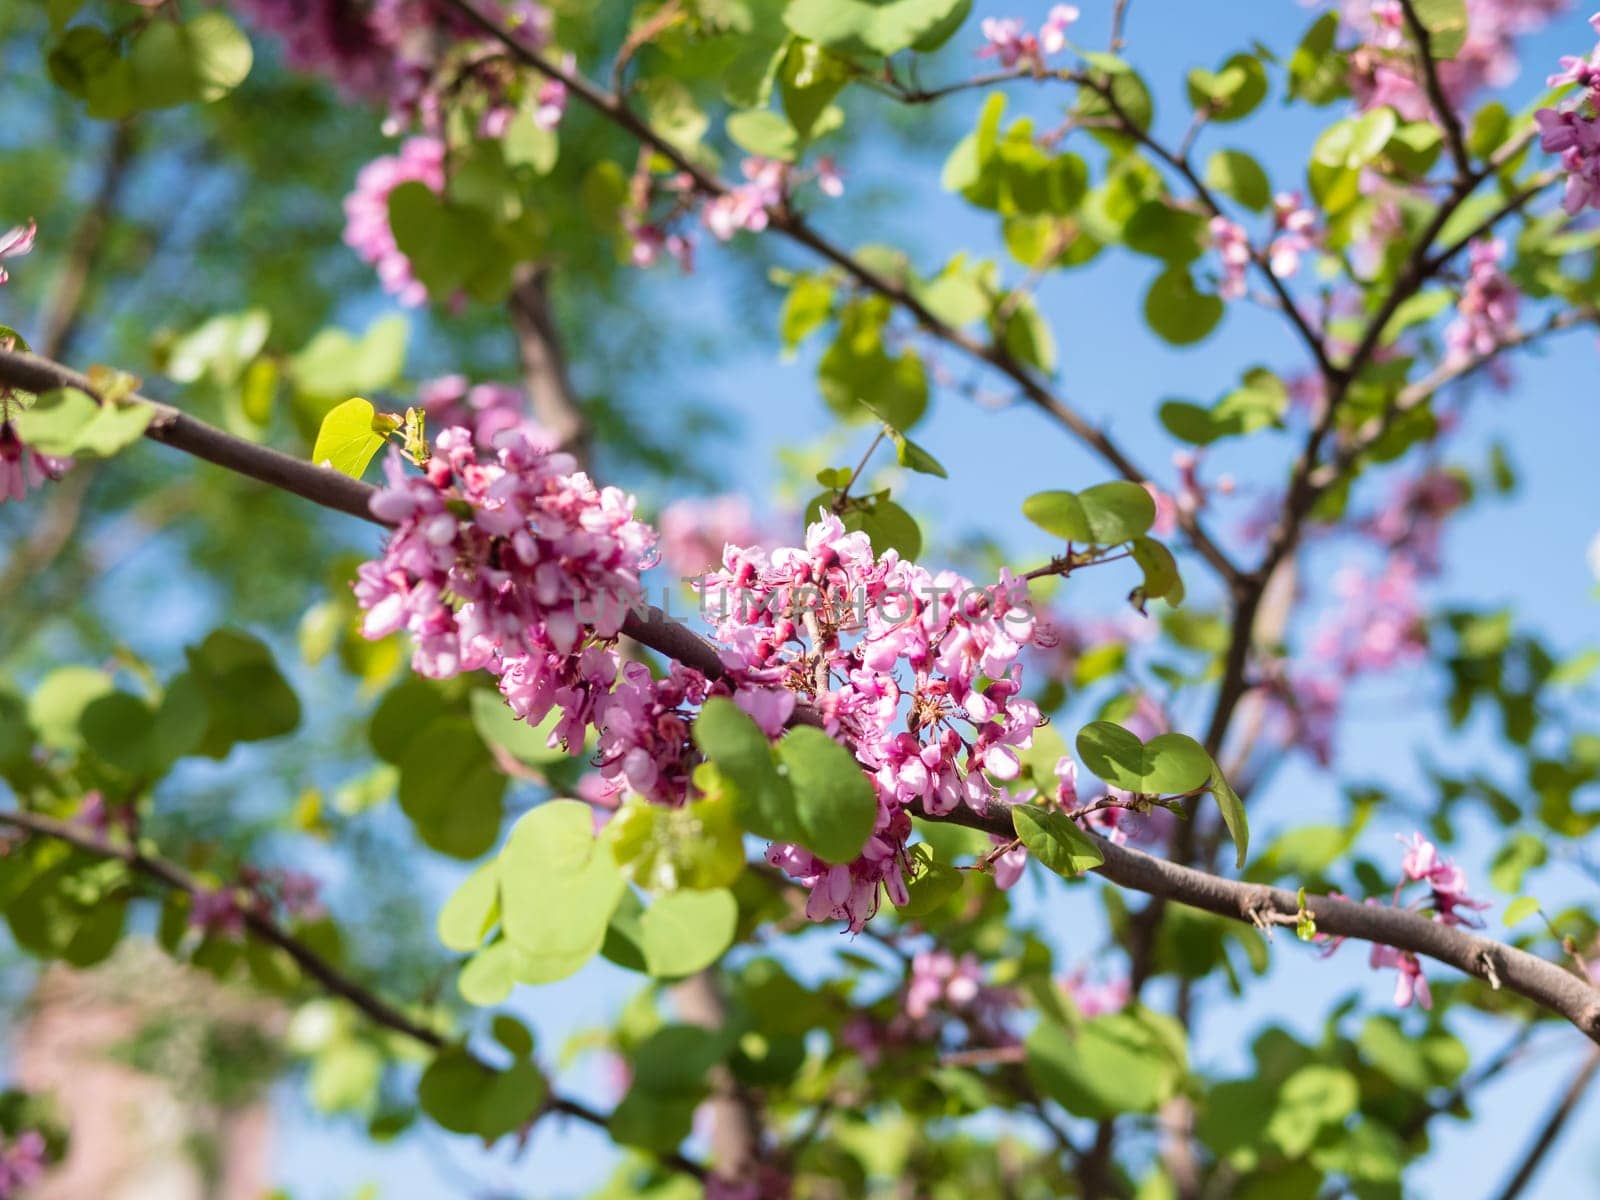 A tree branch adorned with pink flowers and green leaves against the backdrop of a clear blue sky